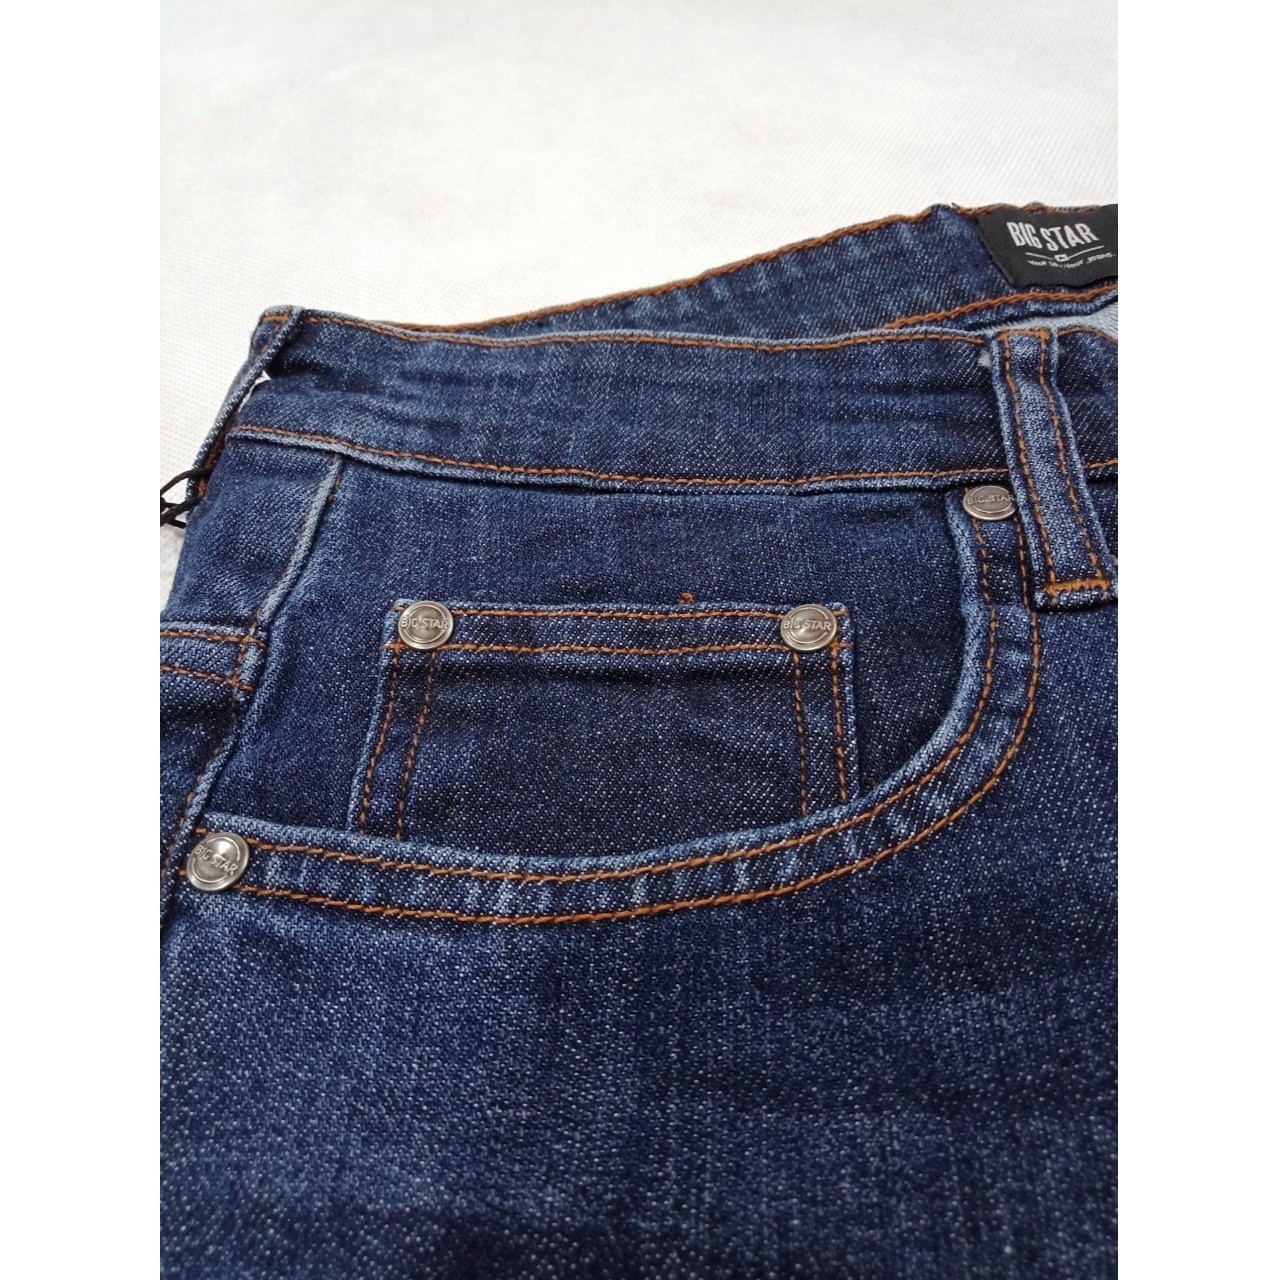 Denim Blue Jeans Export Quality Straight Fit